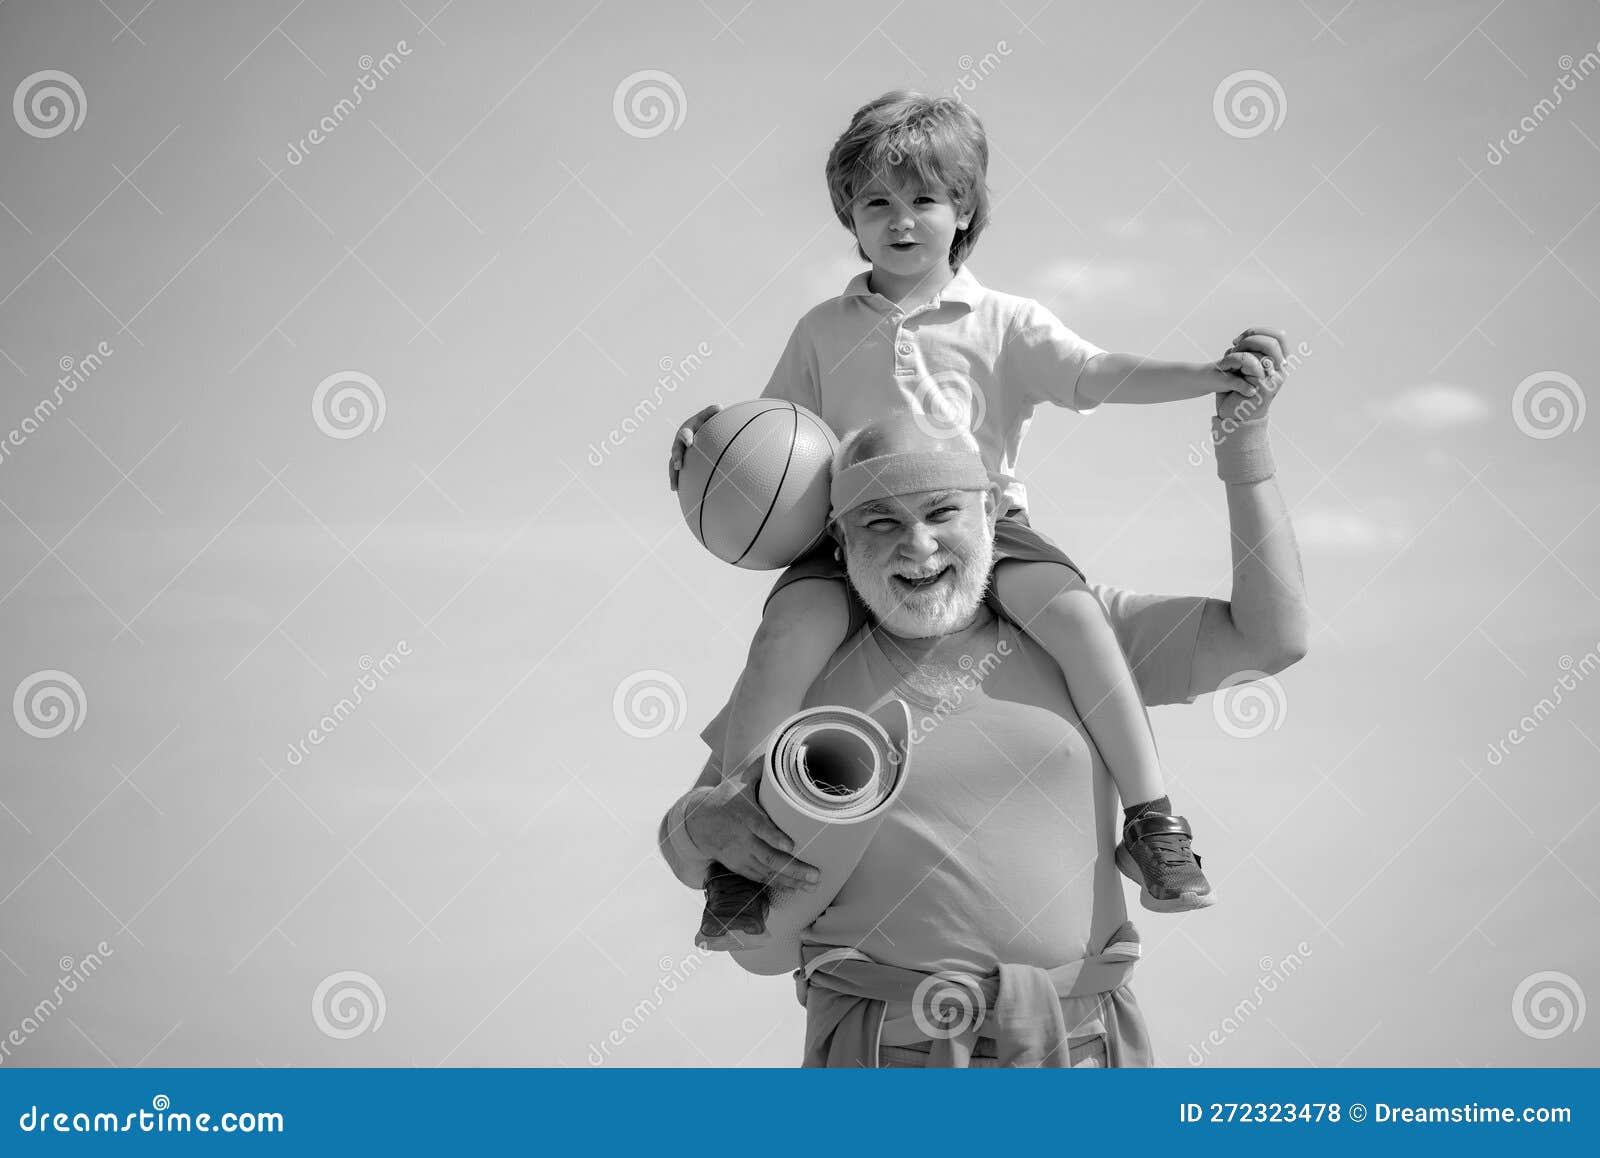 https://thumbs.dreamstime.com/z/motivation-sport-concept-father-son-sporting-family-time-together-sport-exercise-kids-happy-fit-senior-men-exercising-272323478.jpg